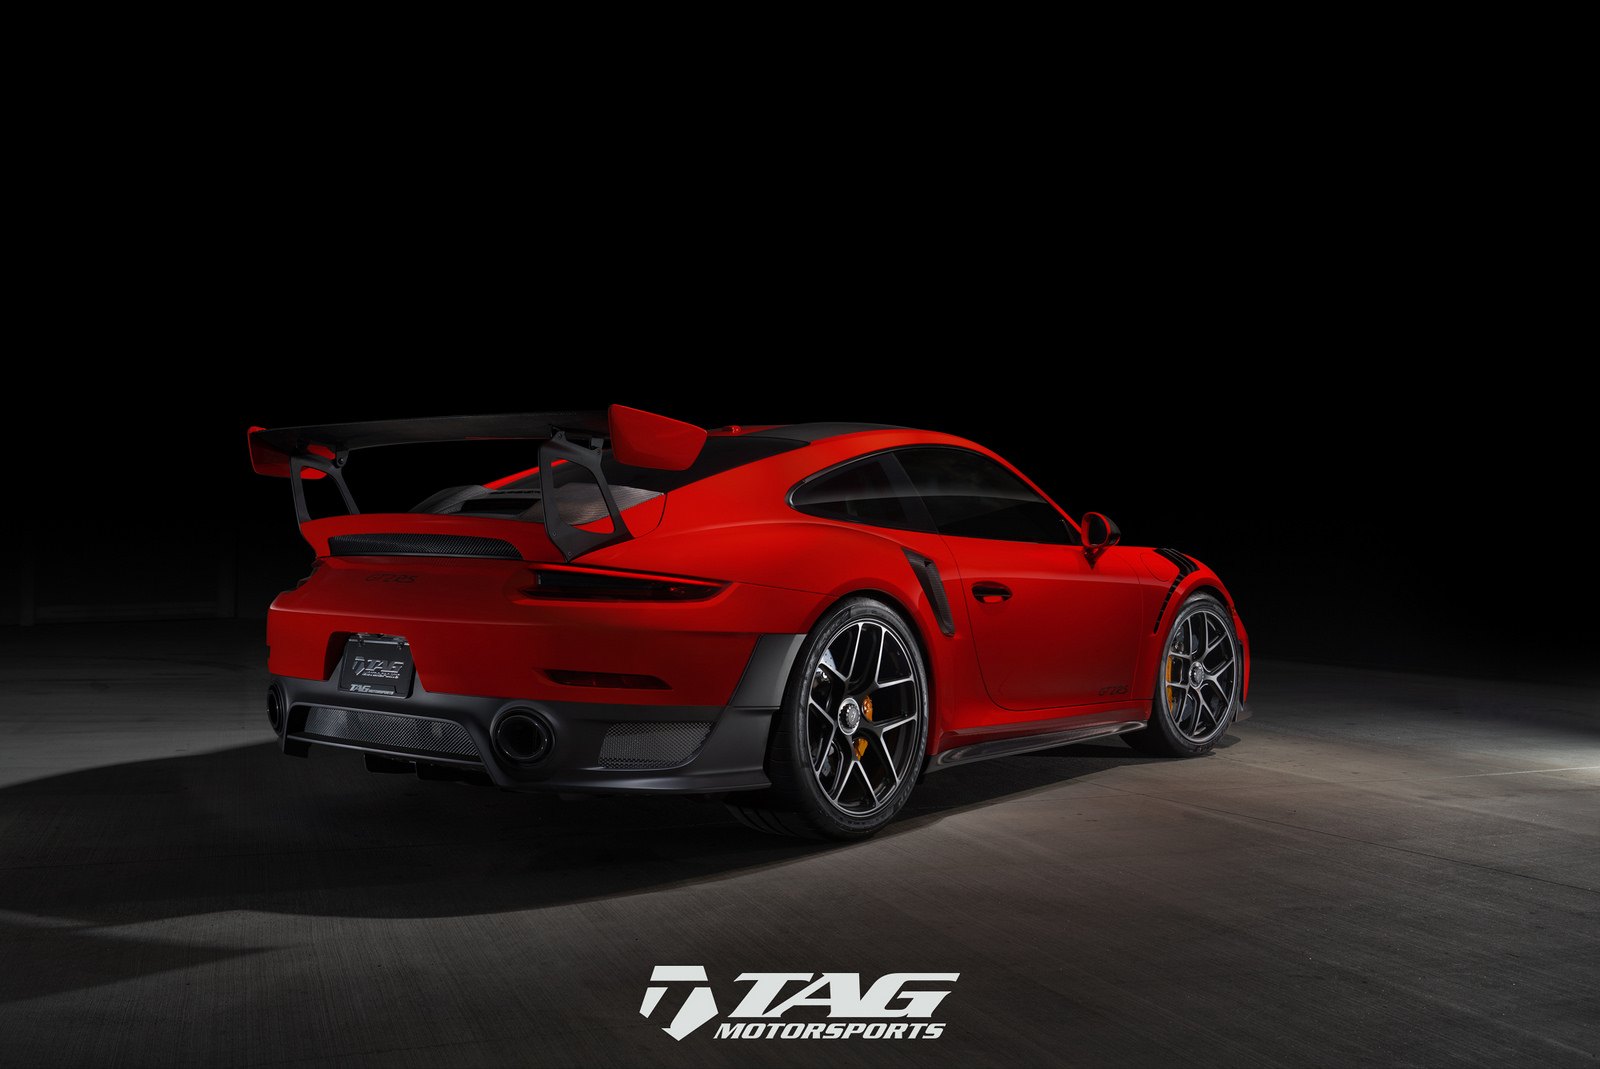 Large Sport Wing Spoiler on Red Porsche 911 - Photo by HRE Wheels